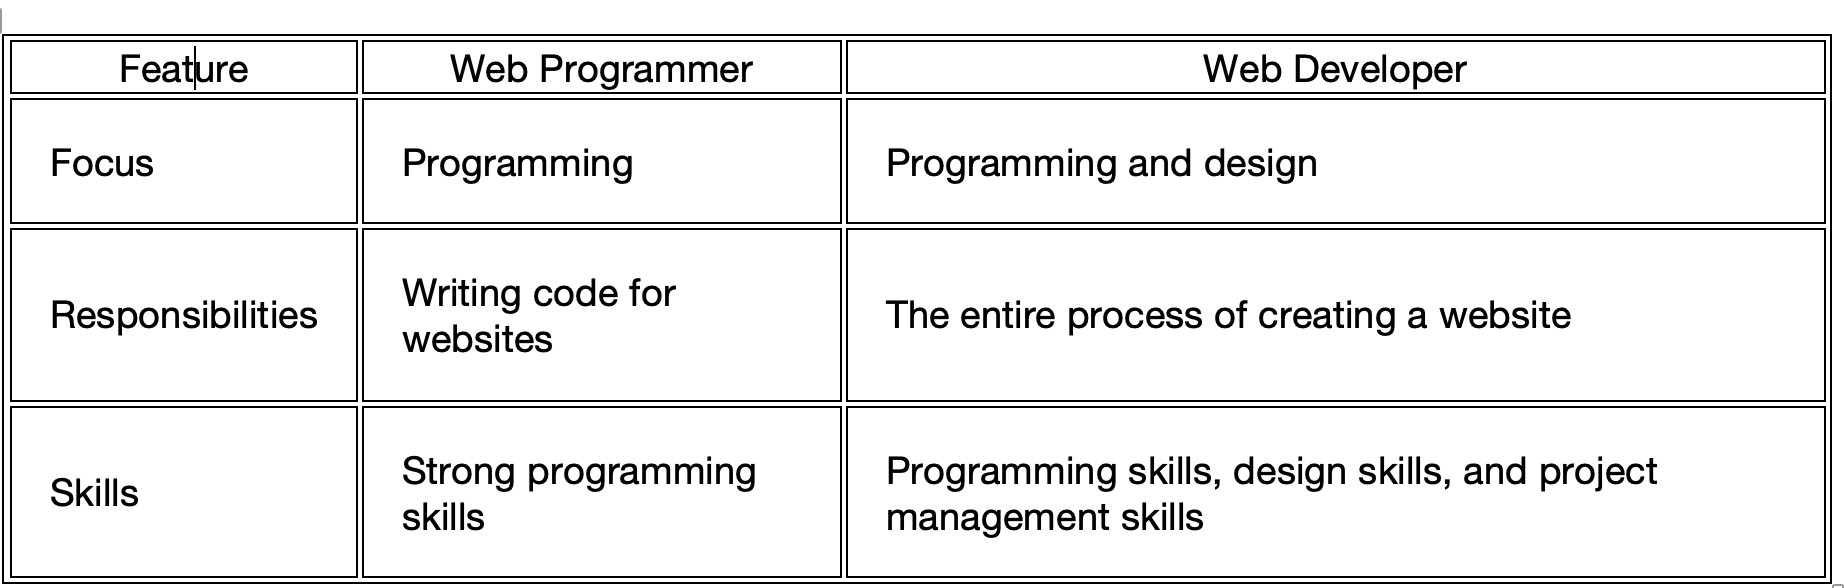 differences between web programmers and web developers